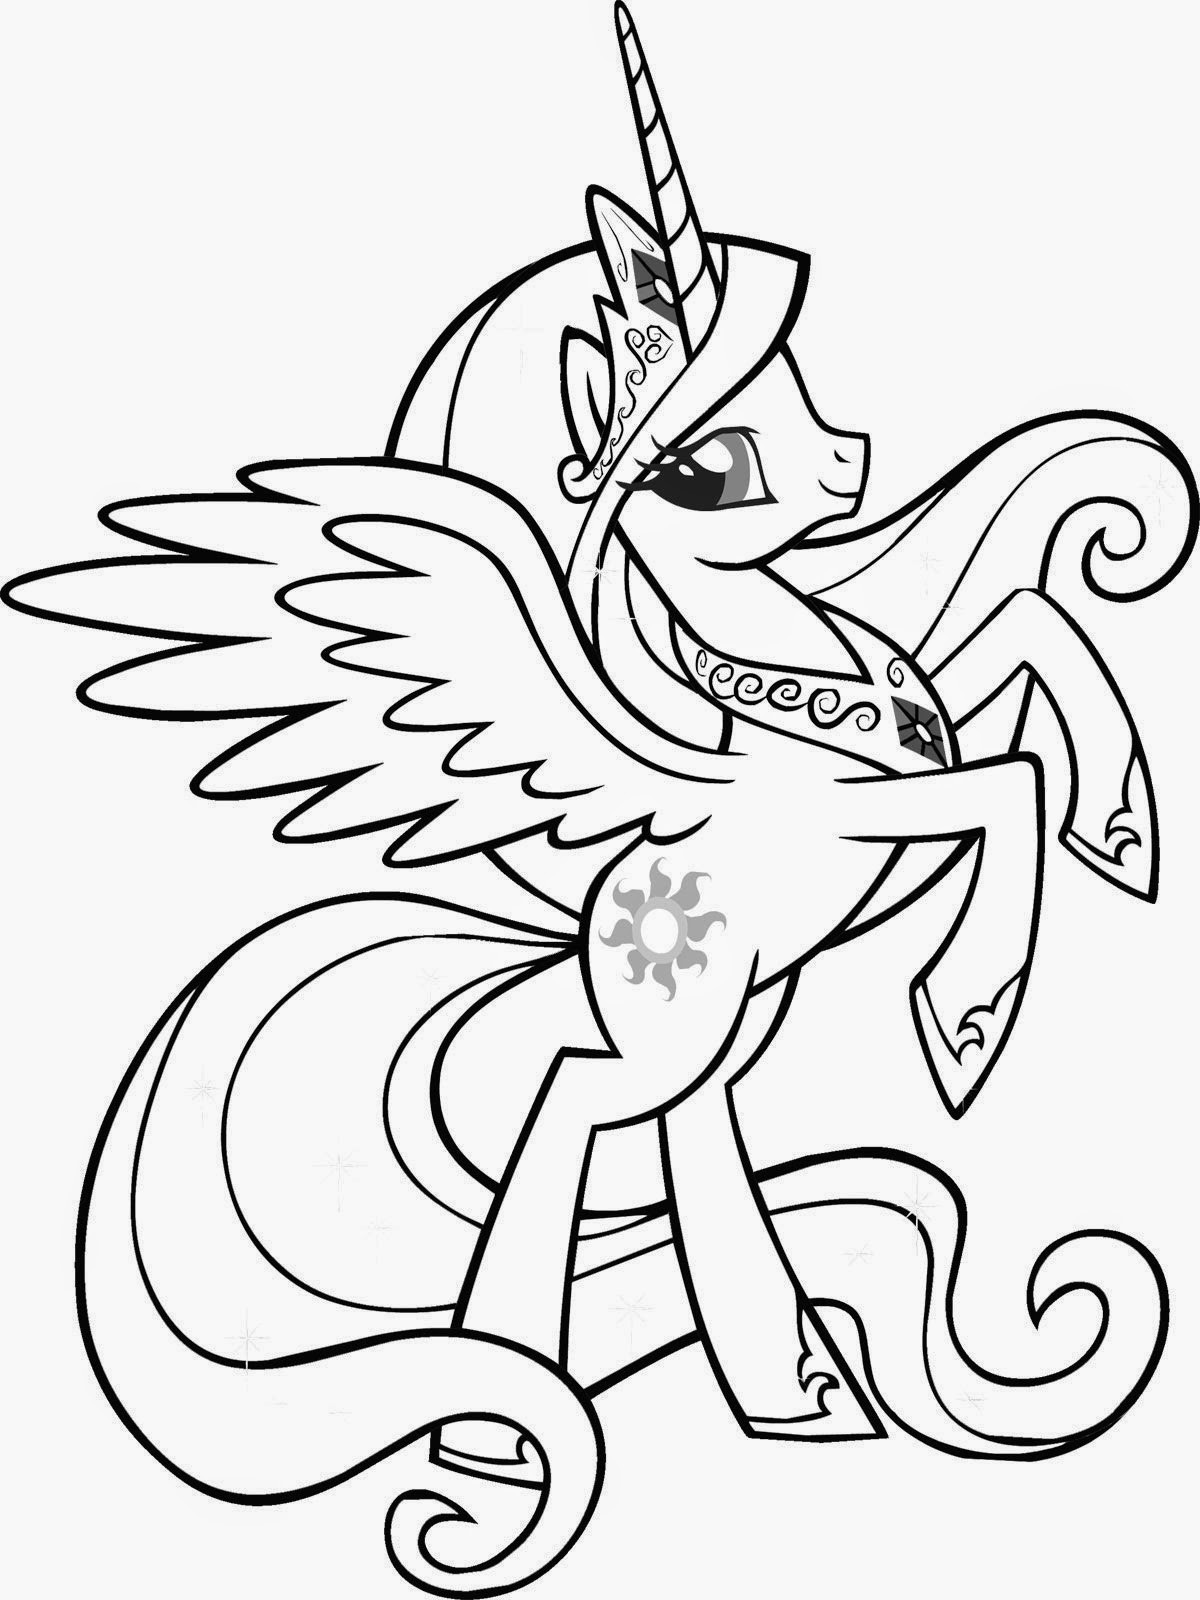 Flying Unicorn Coloring Pages 77 with Flying Unicorn Coloring Pages